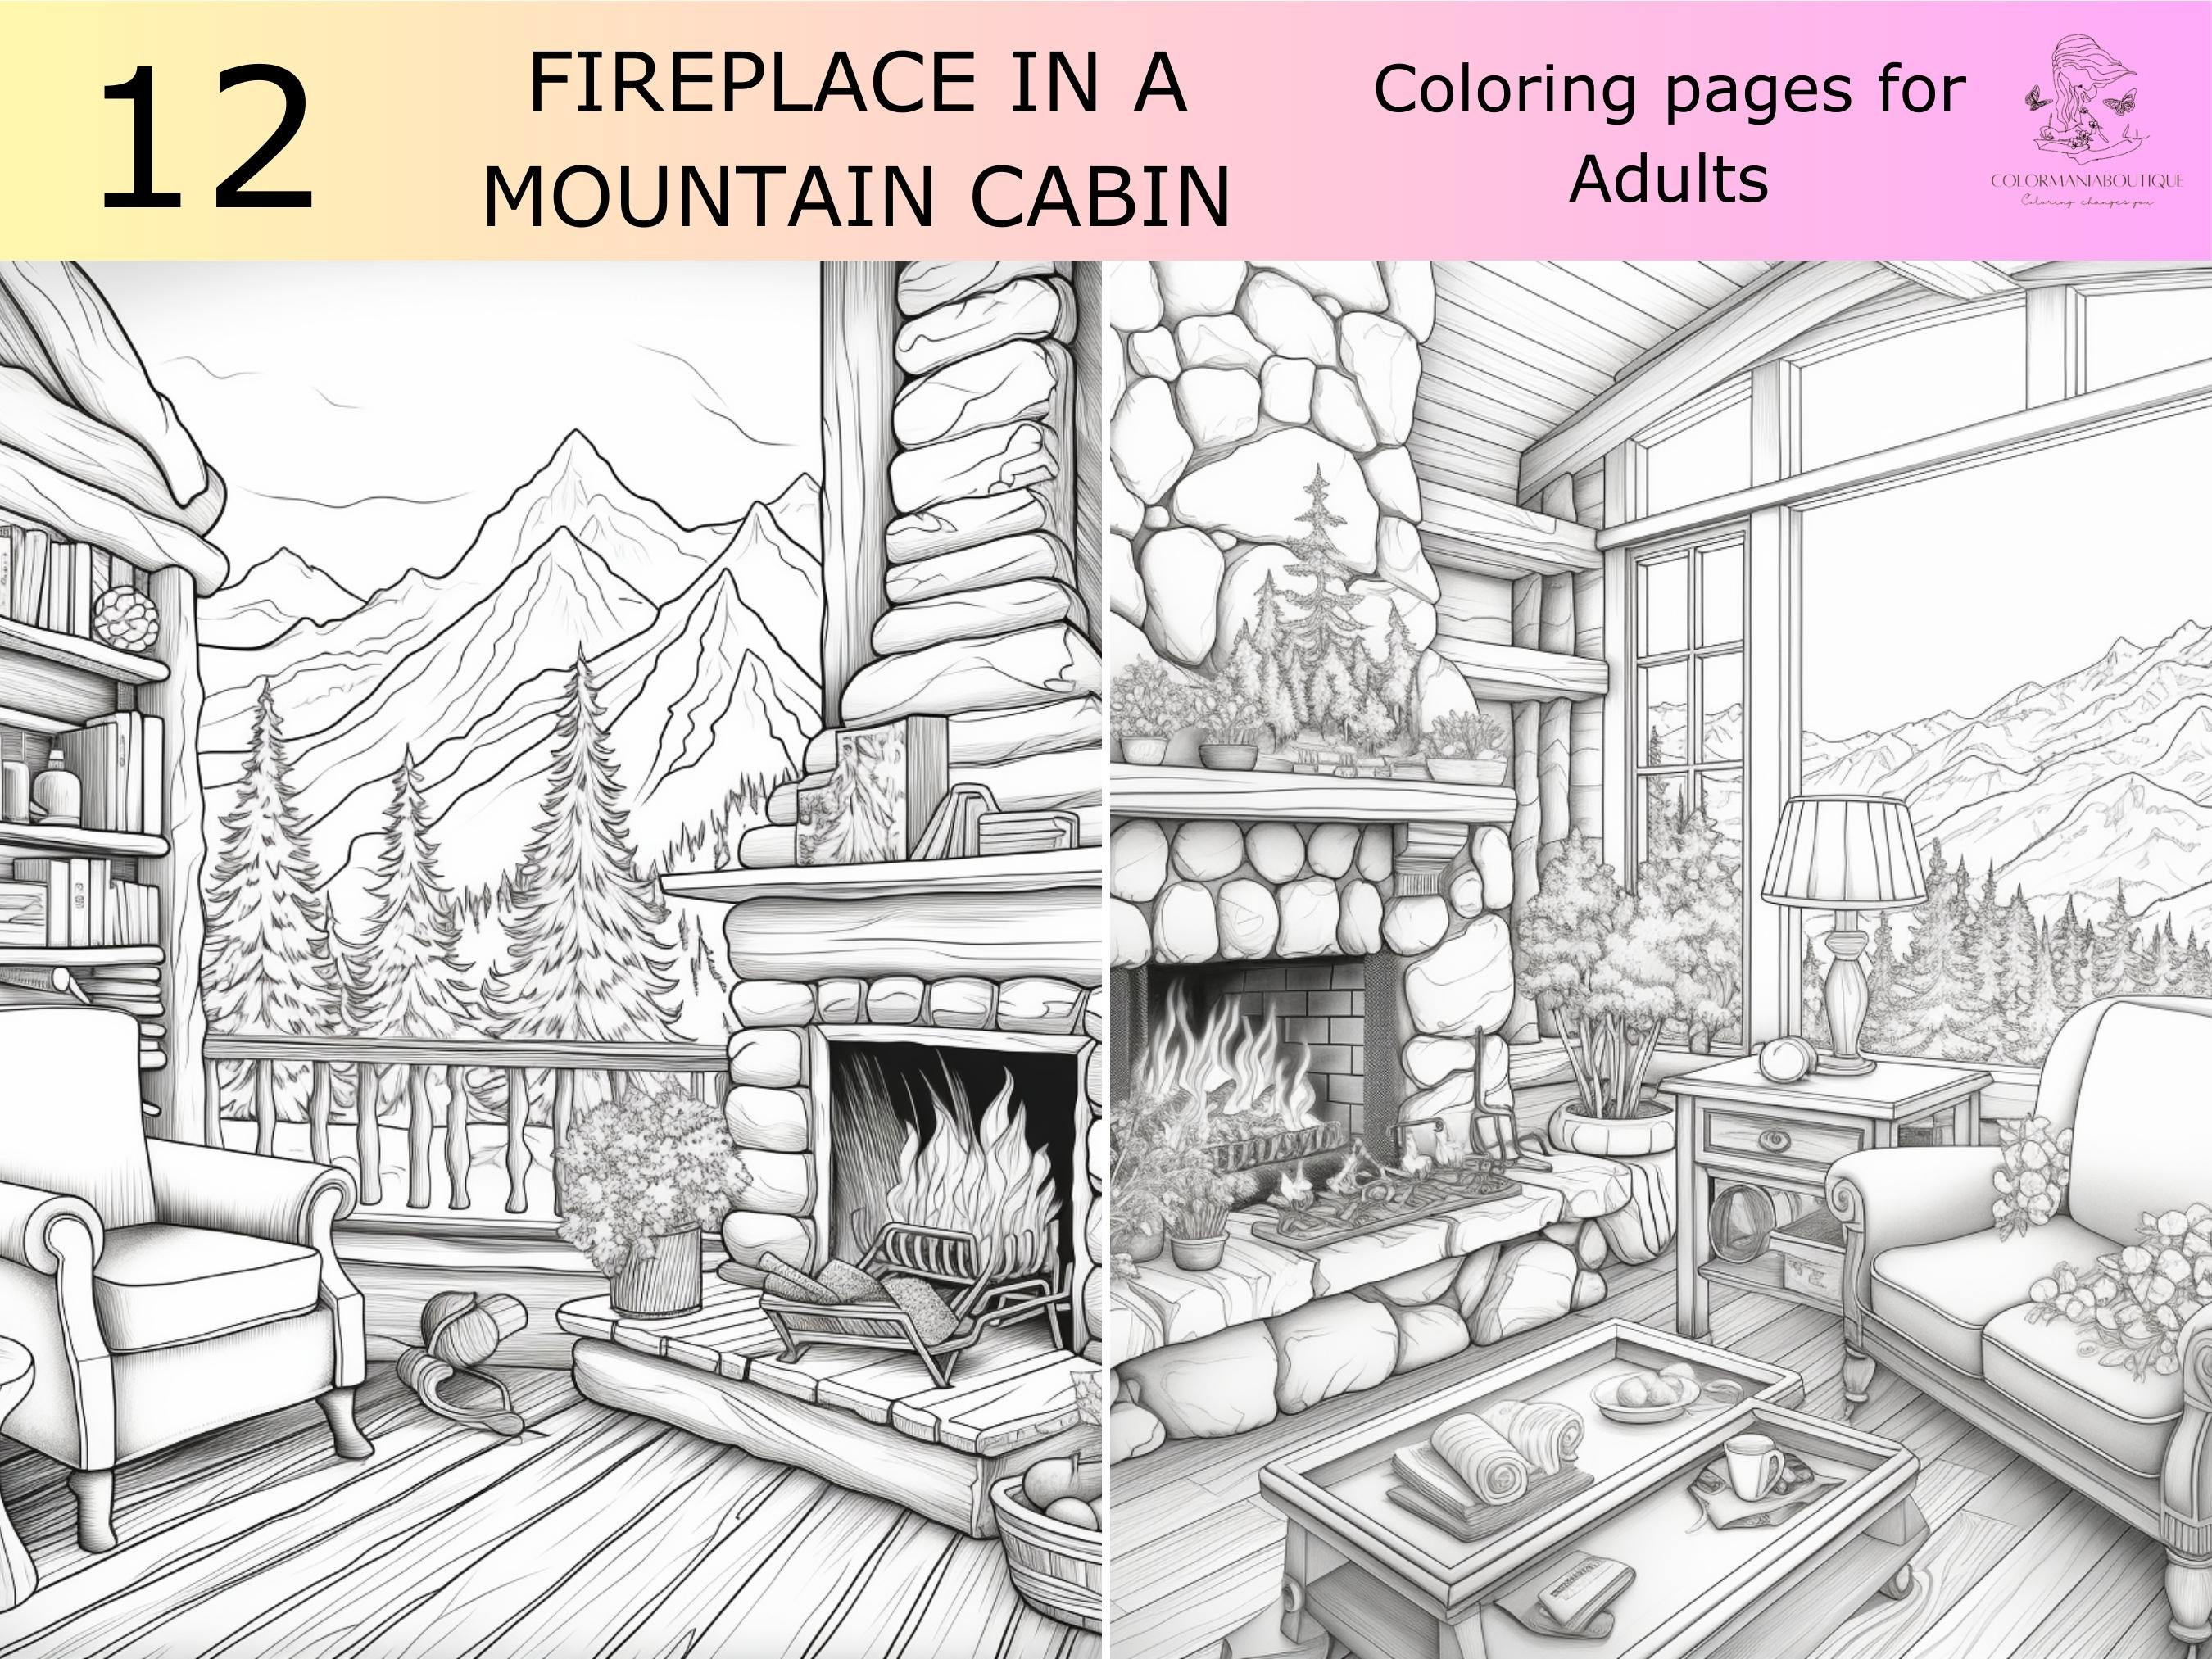 Greyscale mountain cabin printable coloring bookprintable adult coloring page download greyscale fireplace pictures